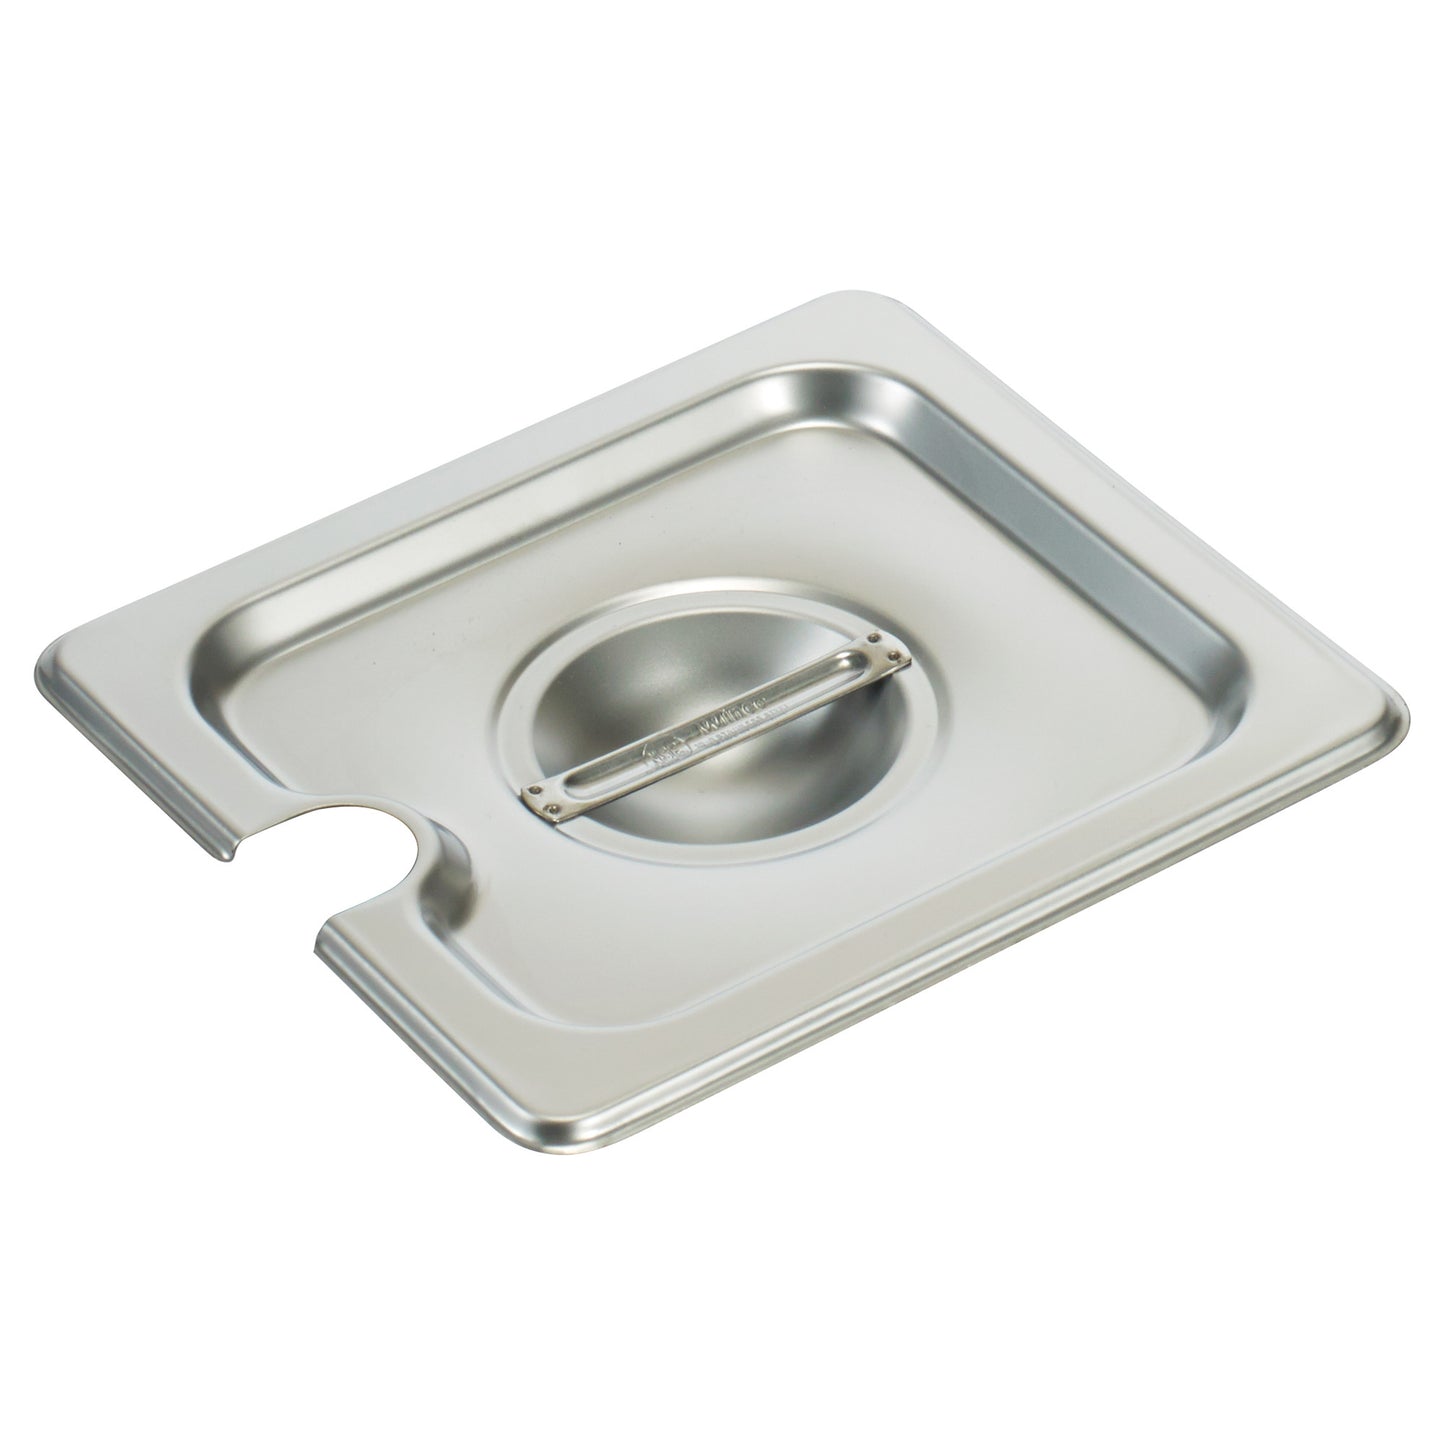 SPCS - 18/8 Stainless Steel Steam Pan Cover, Slotted - 1/6